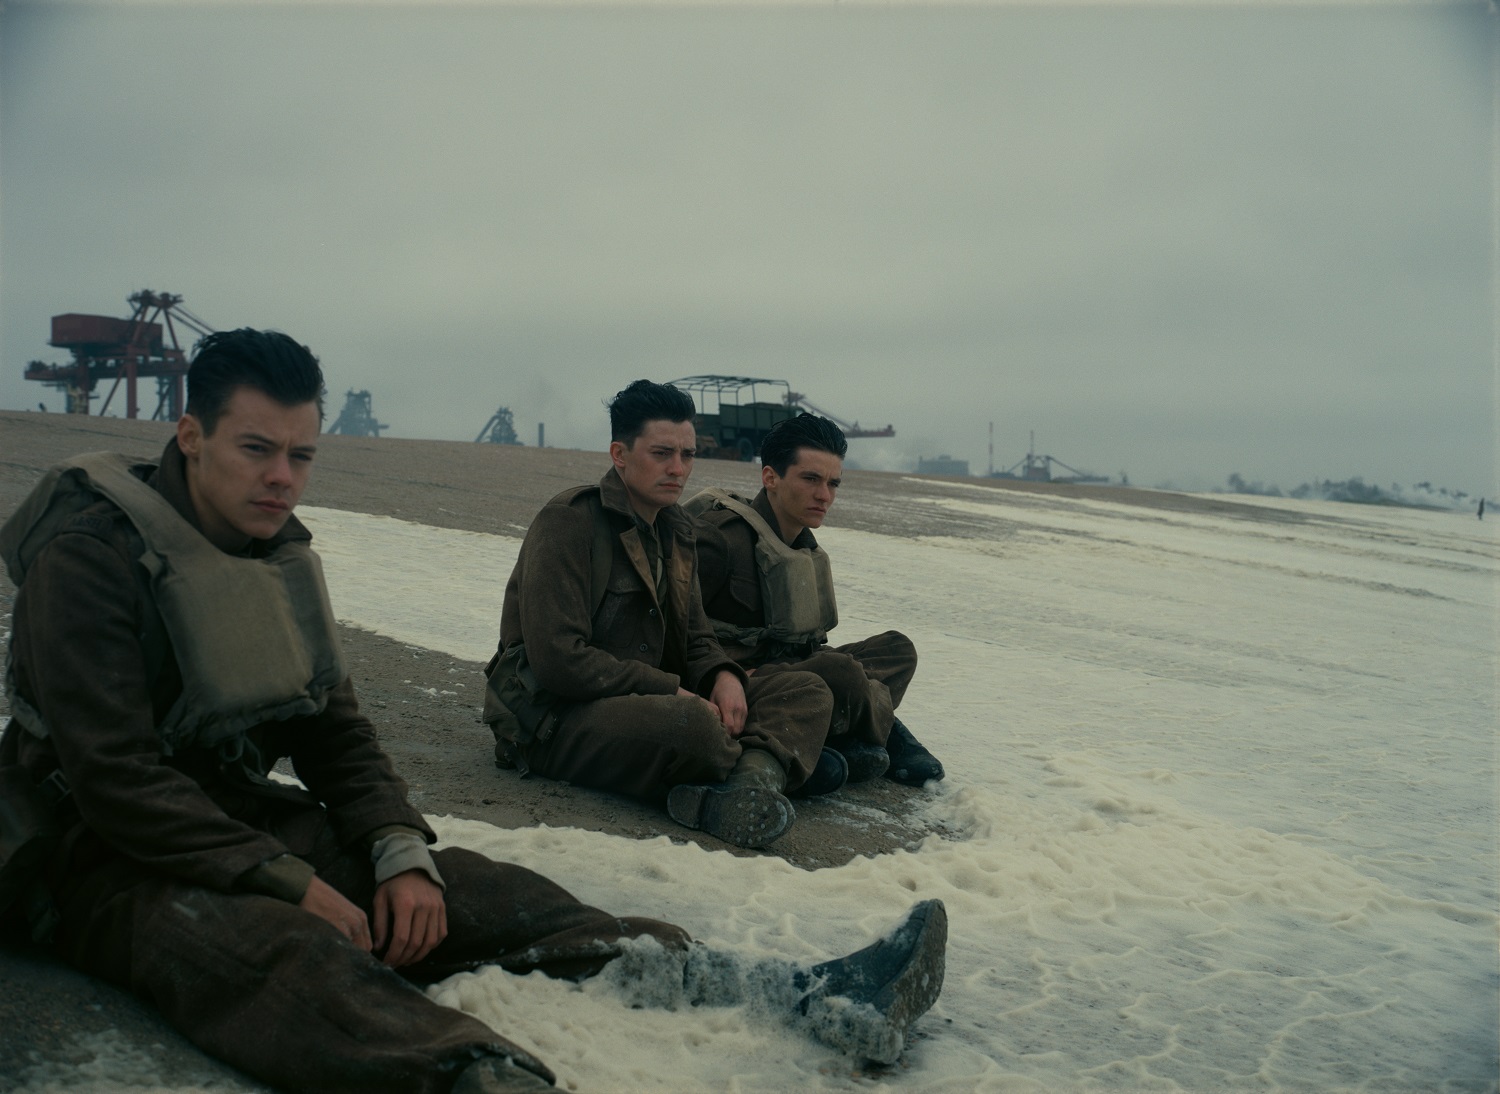 (L-R) Harry Styles as Alex, Aneurin Barnard as Gibson and Fionn Whitehead as Tommy in the Warner Bros. Pictures action thriller "DUNKIRK," a Warner Bros. Pictures release © 2017 WARNER BROS. ENTERTAINMENT INC. ALL RIGHTS RESERVED . Photo Credit: Melinda Sue Gordon.